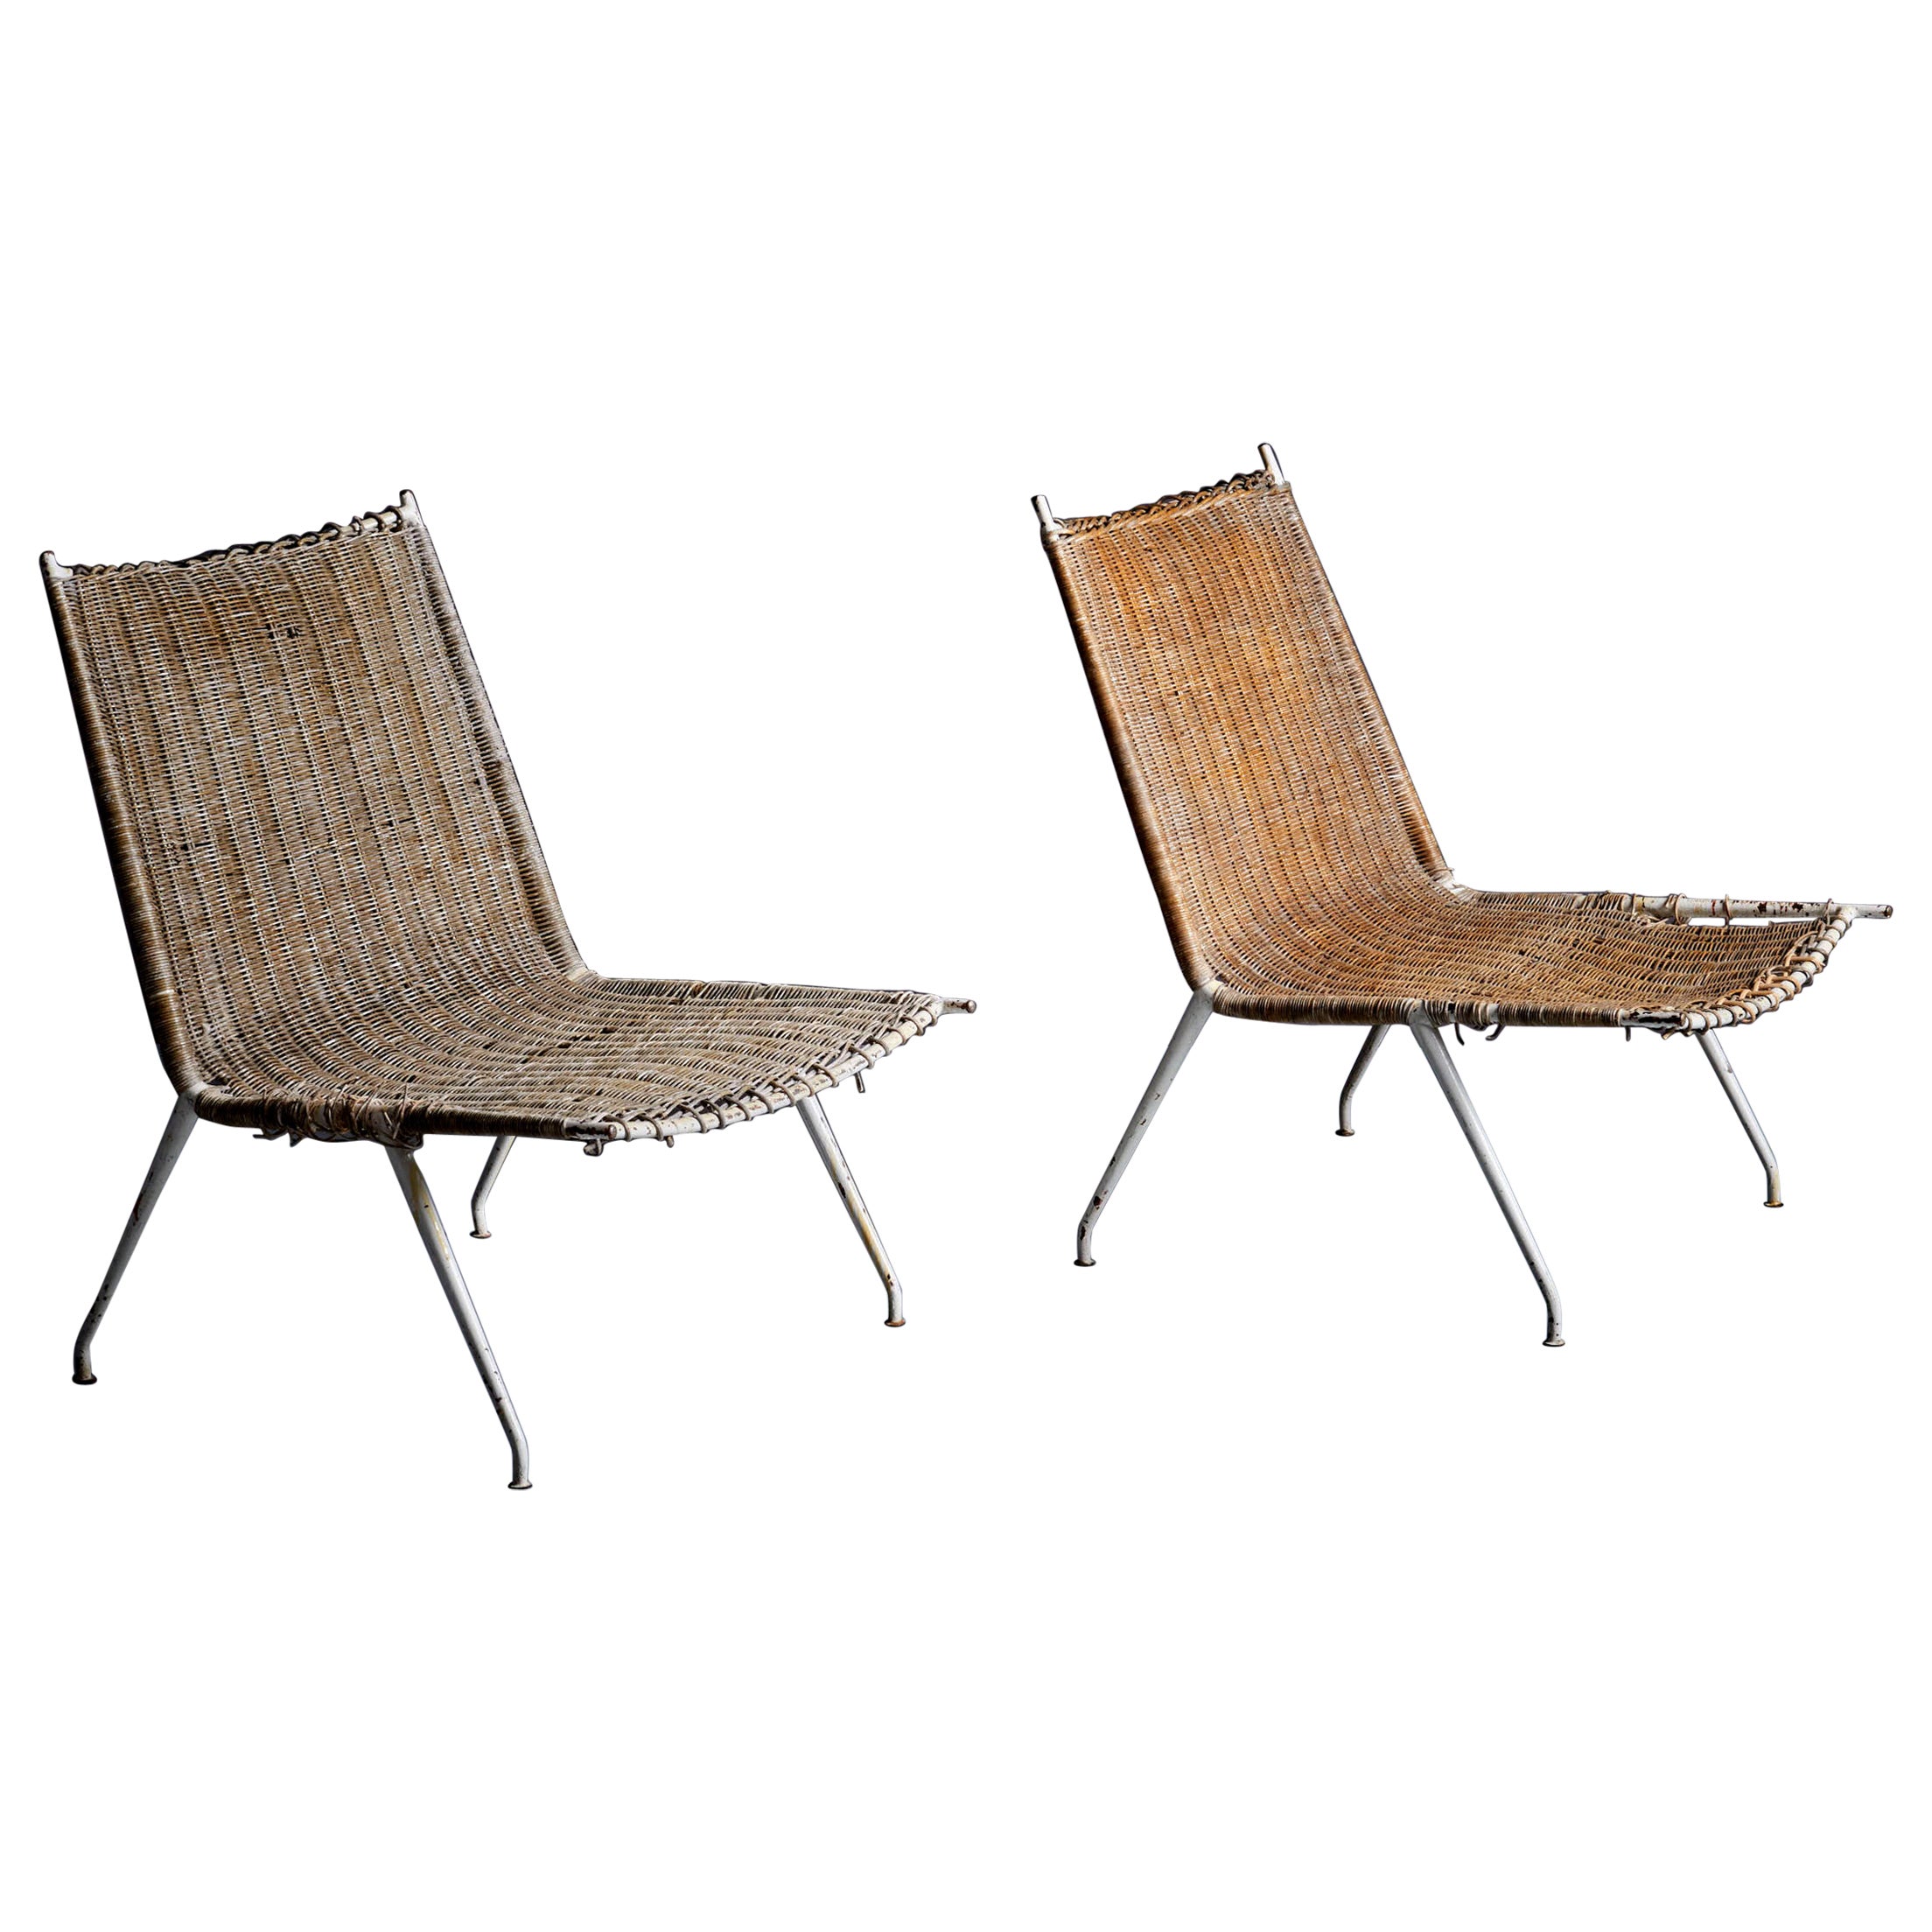 Raoul Guys for Airborne Pair of Lounge Chairs France - 1950s For Sale